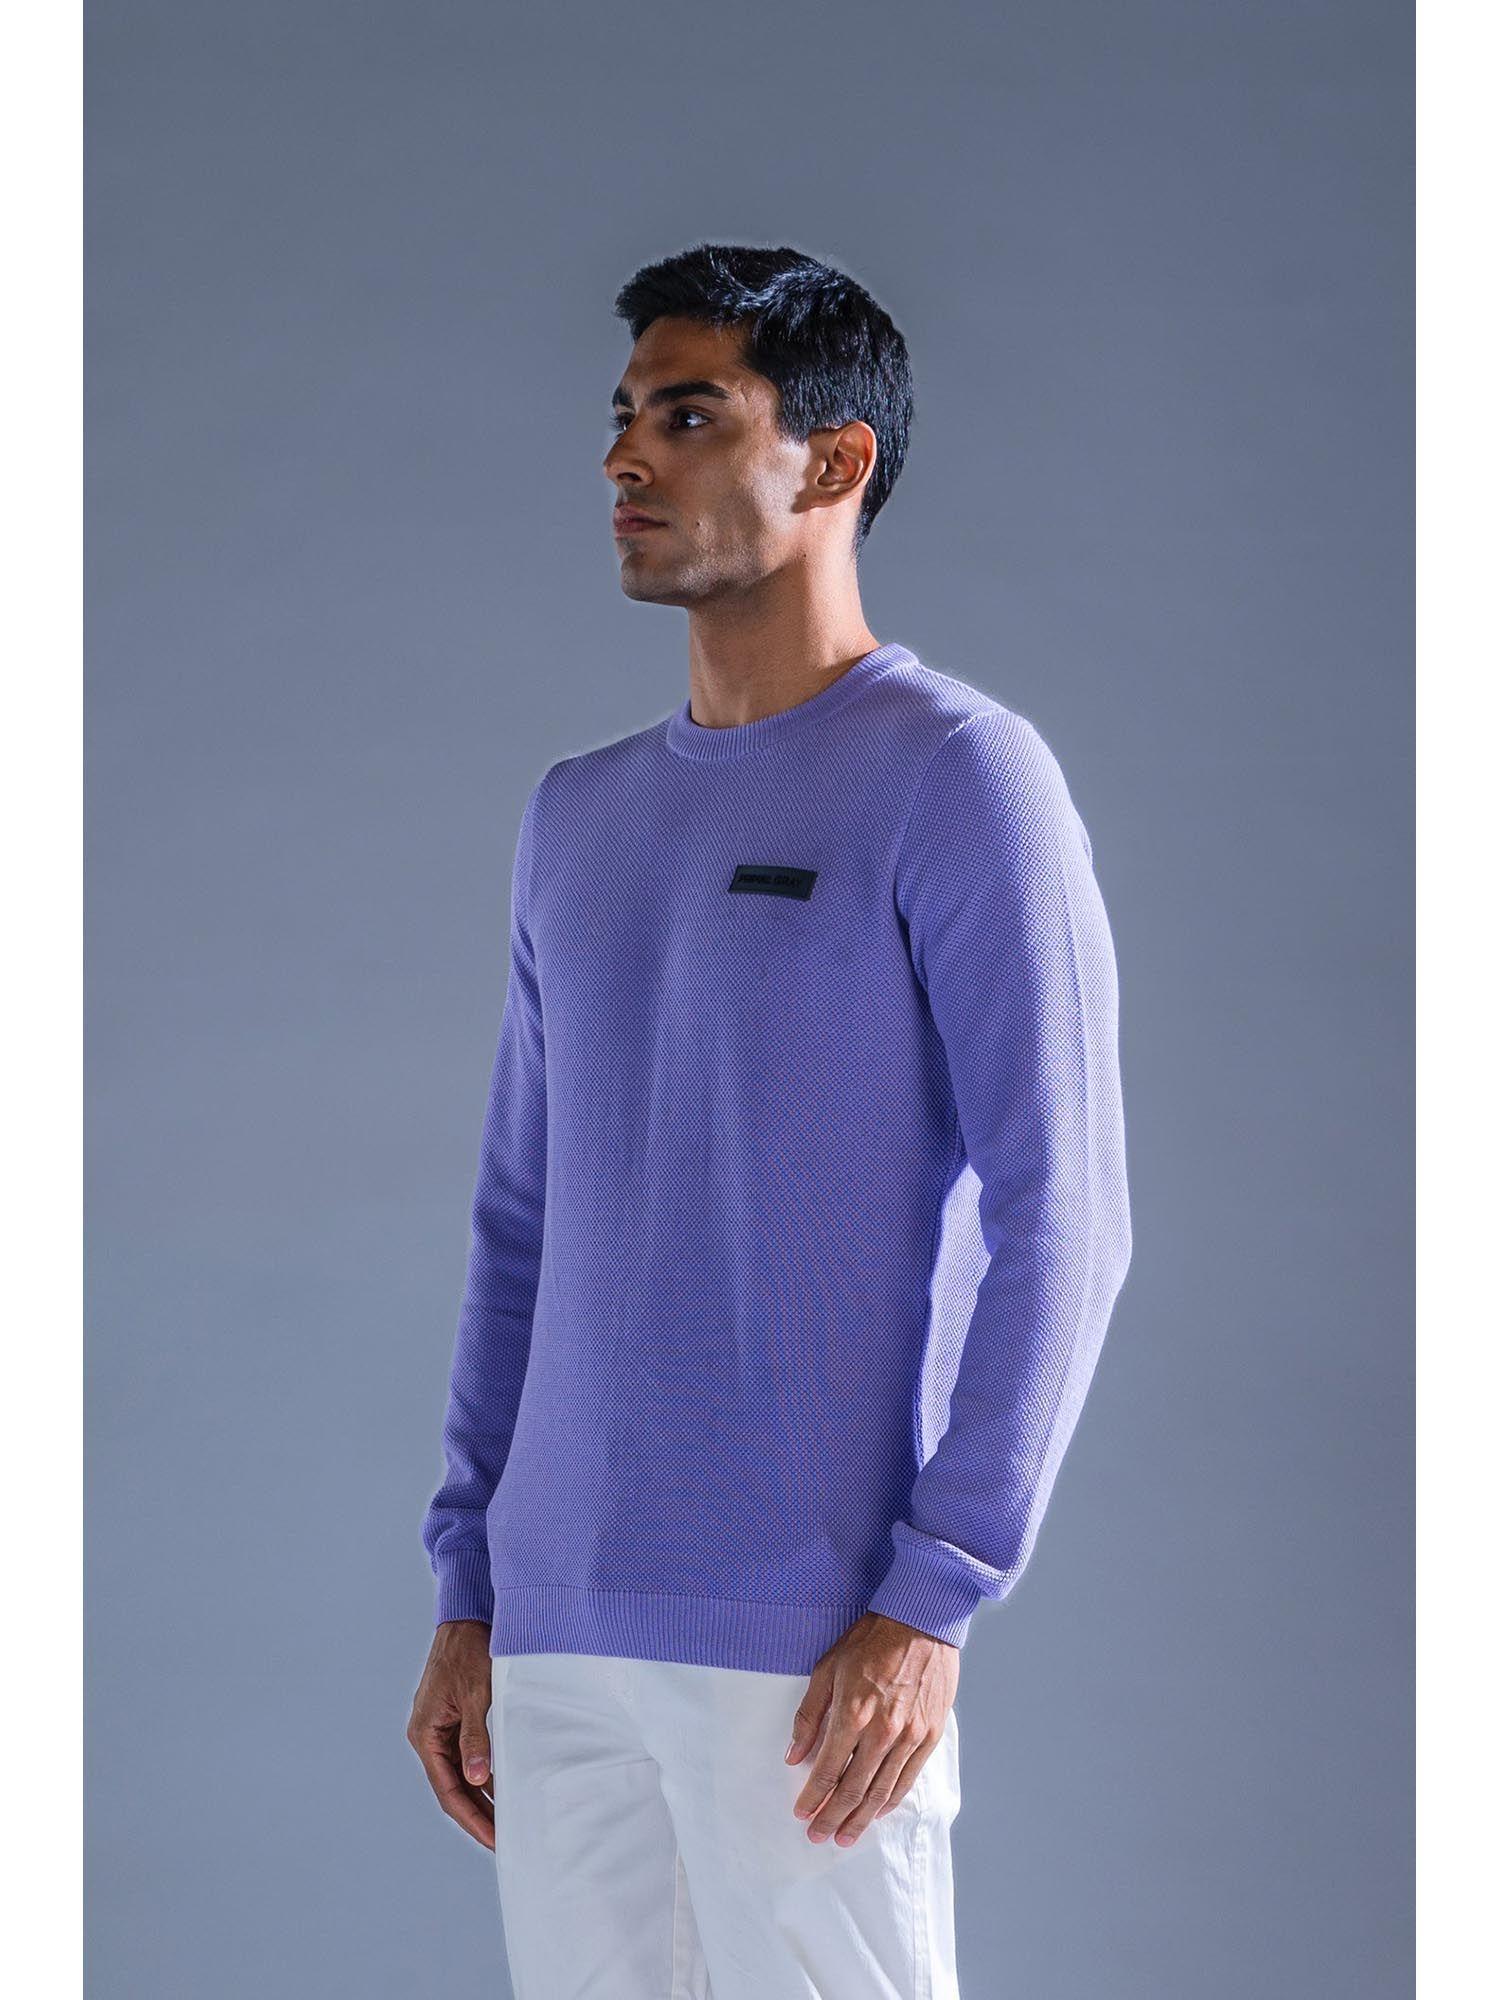 lavender-cotton-knit-sweater-classic-sweater